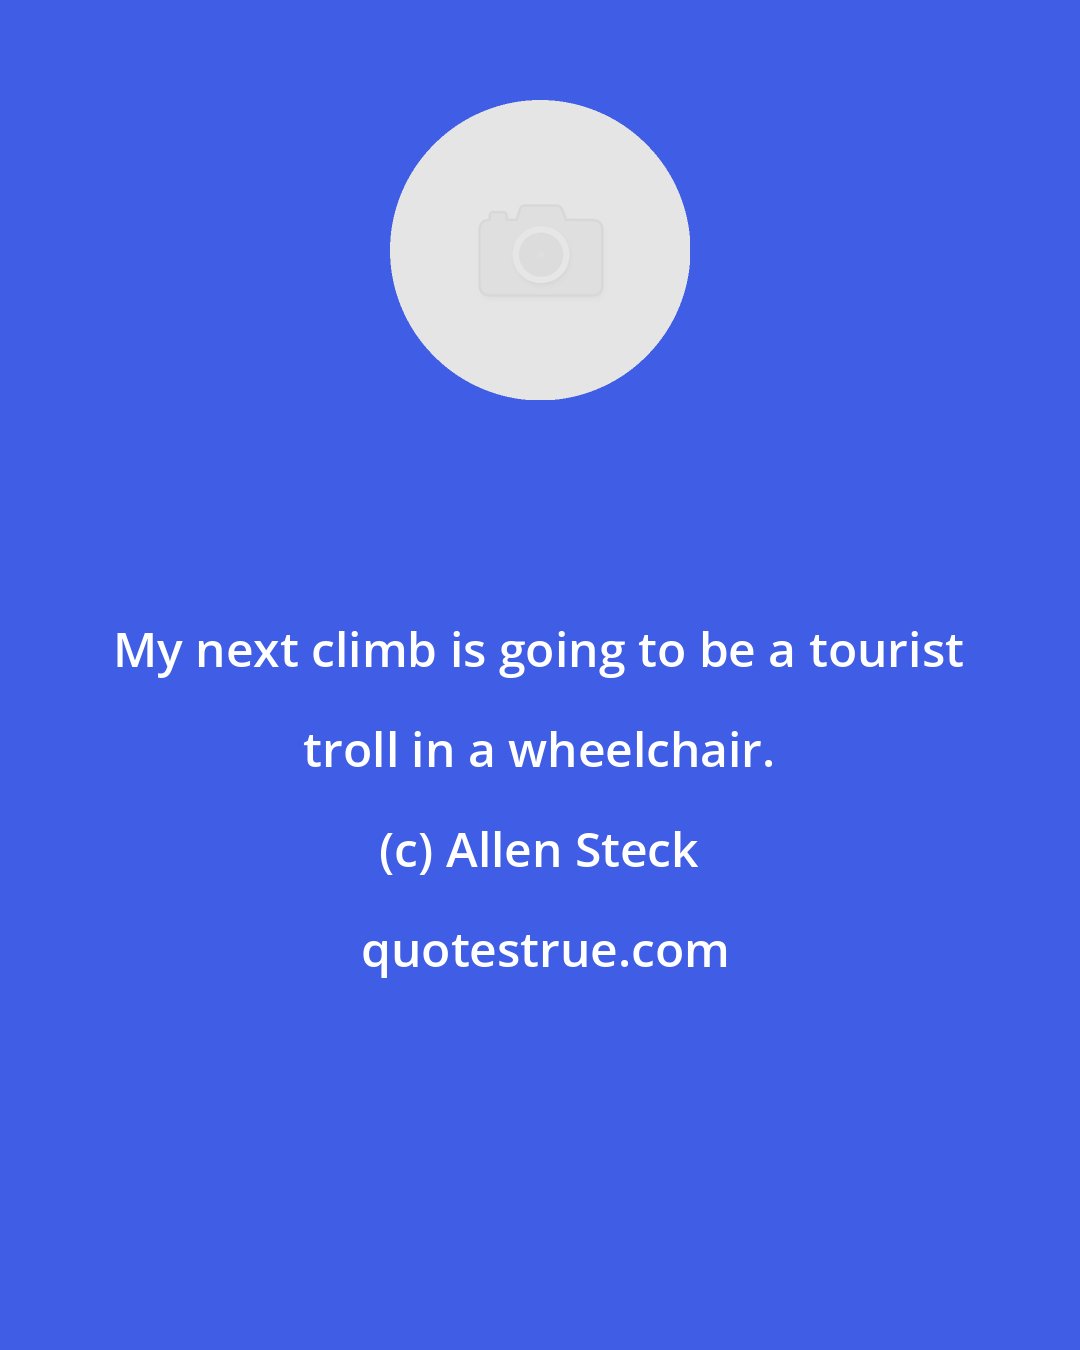 Allen Steck: My next climb is going to be a tourist troll in a wheelchair.